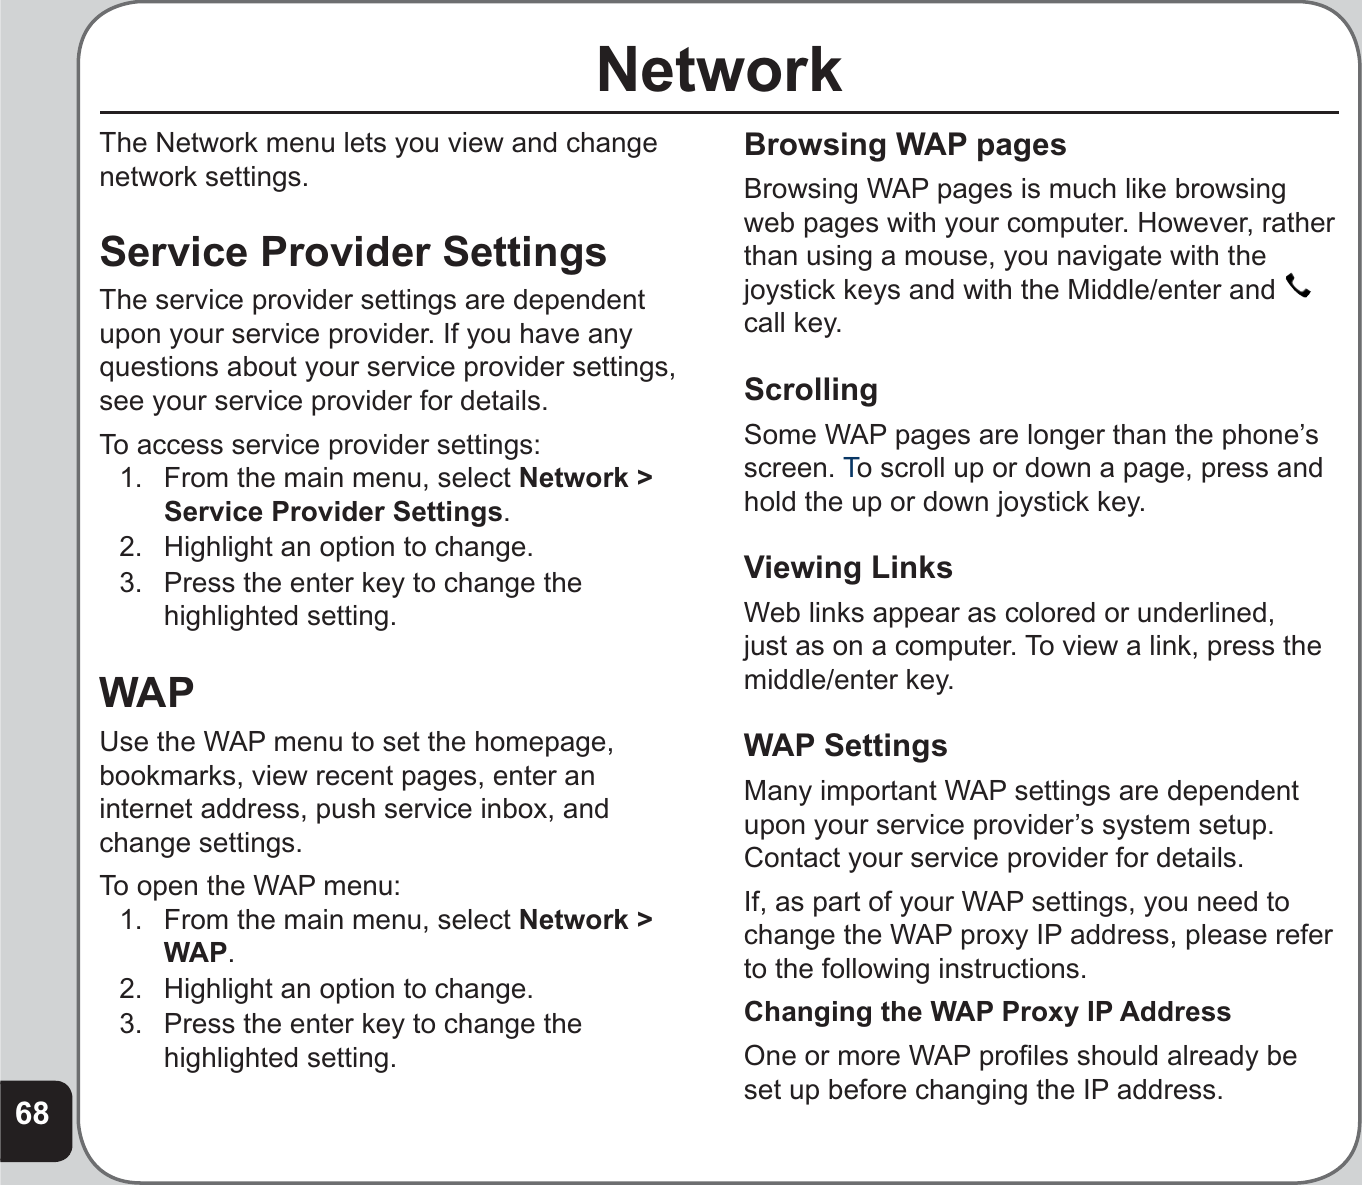 68NetworkThe Network menu lets you view and change network settings.Service Provider SettingsThe service provider settings are dependent upon your service provider. If you have any questions about your service provider settings, see your service provider for details.To access service provider settings:1.  From the main menu, select Network &gt; Service Provider Settings.2.  Highlight an option to change.3.  Press the enter key to change the highlighted setting.WAPUse the WAP menu to set the homepage, bookmarks, view recent pages, enter an internet address, push service inbox, and change settings.To open the WAP menu:1.  From the main menu, select Network &gt; WAP.2.  Highlight an option to change.3.  Press the enter key to change the highlighted setting.Browsing WAP pagesBrowsing WAP pages is much like browsing web pages with your computer. However, rather than using a mouse, you navigate with the joystick keys and with the Middle/enter and call key. ScrollingSome WAP pages are longer than the phone’s screen. To scroll up or down a page, press and hold the up or down joystick key. Viewing LinksWeb links appear as colored or underlined, just as on a computer. To view a link, press the middle/enter key. WAP SettingsMany important WAP settings are dependent upon your service provider’s system setup. Contact your service provider for details.If, as part of your WAP settings, you need to change the WAP proxy IP address, please refer to the following instructions. Changing the WAP Proxy IP AddressOne or more WAP proﬁ les should already be set up before changing the IP address. 